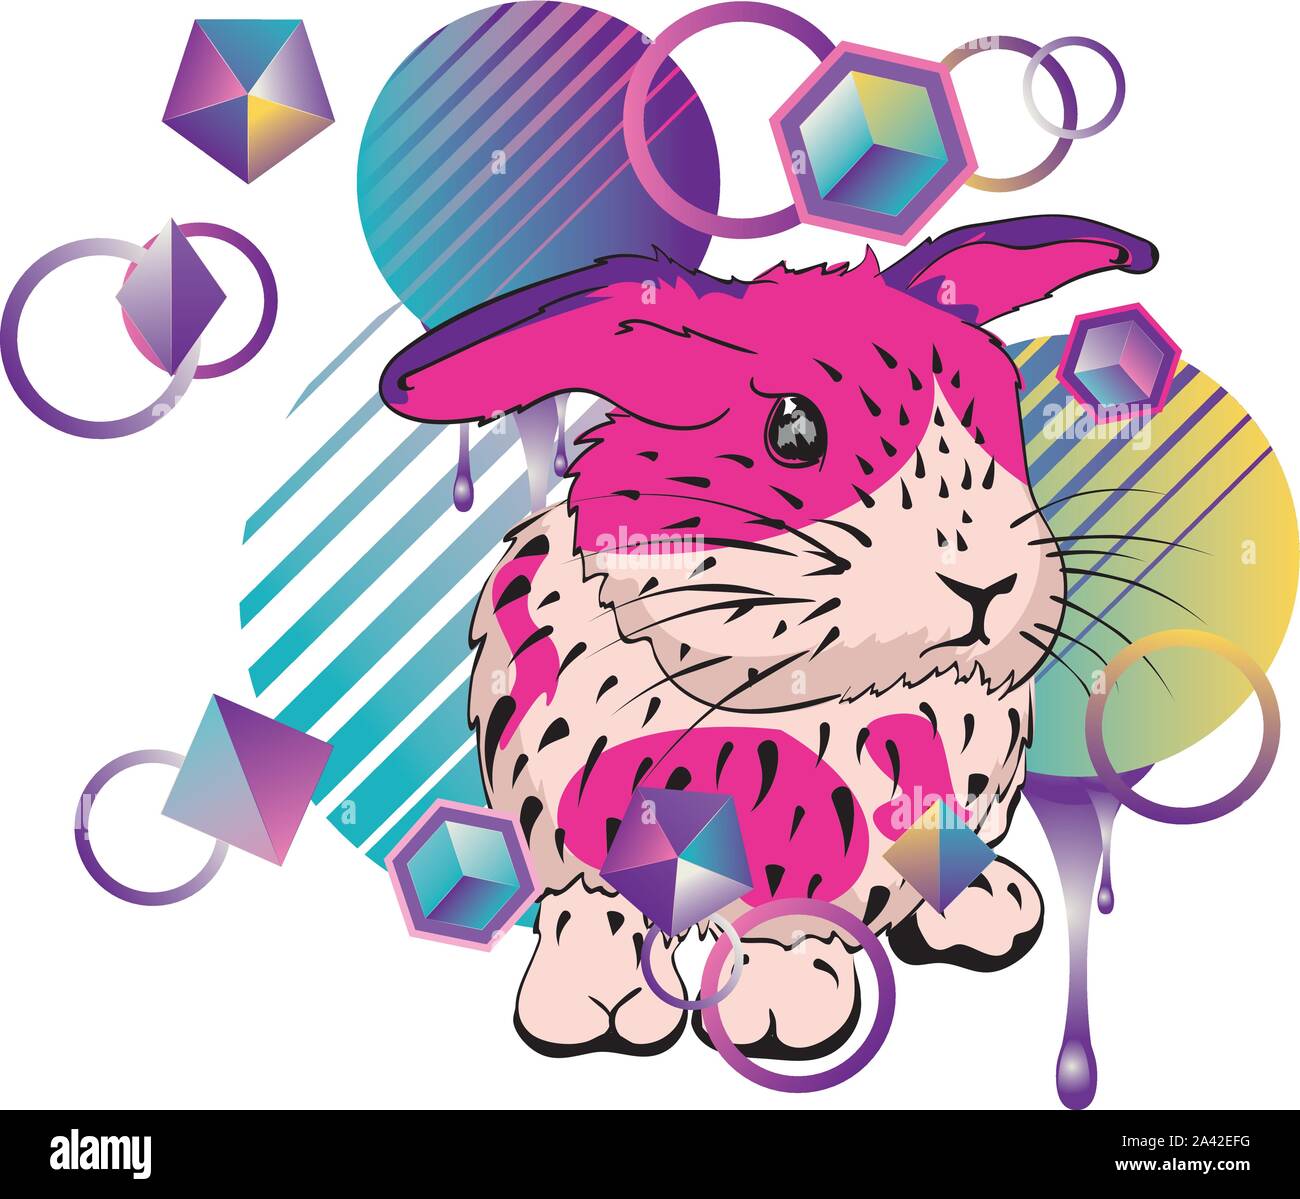 Stylized cute bunny with abstract patterns, decorative background. Stock Vector